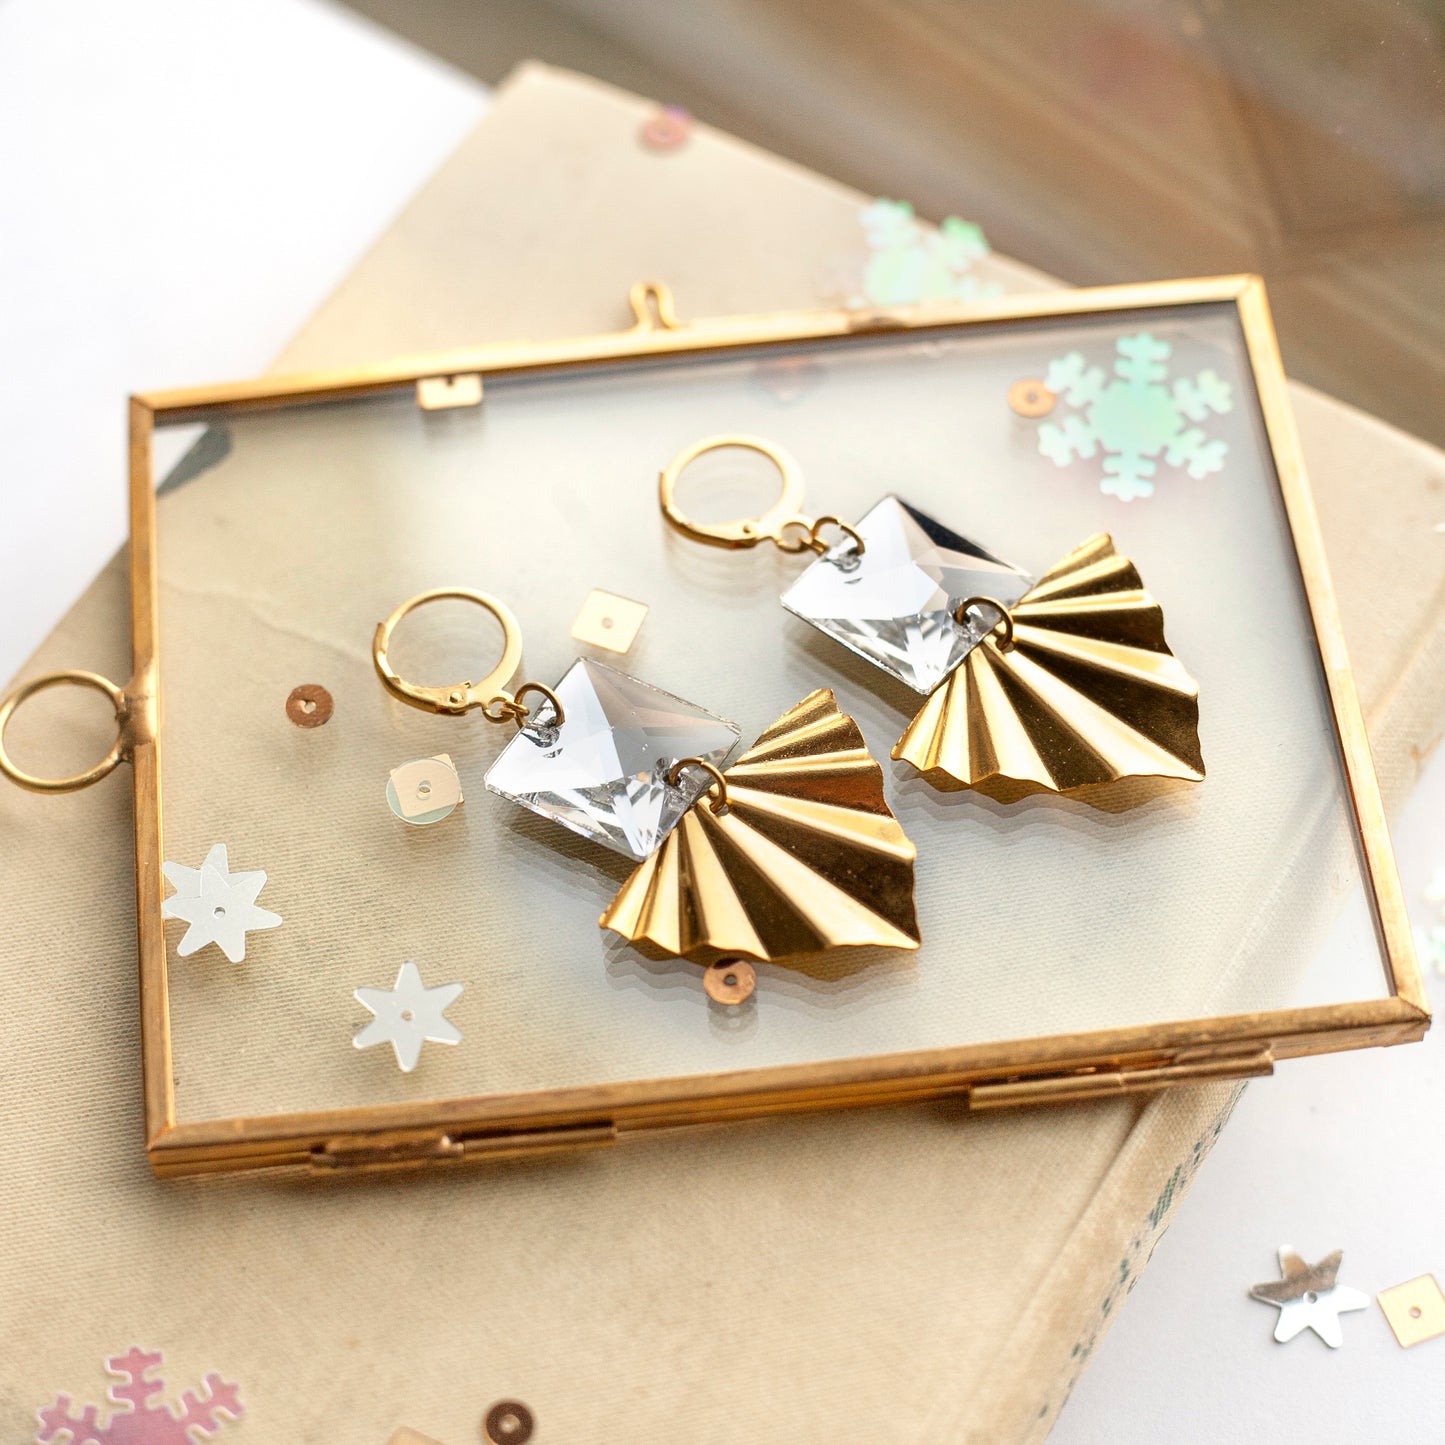 Square vintage crystal earrings and golden triangle pendants